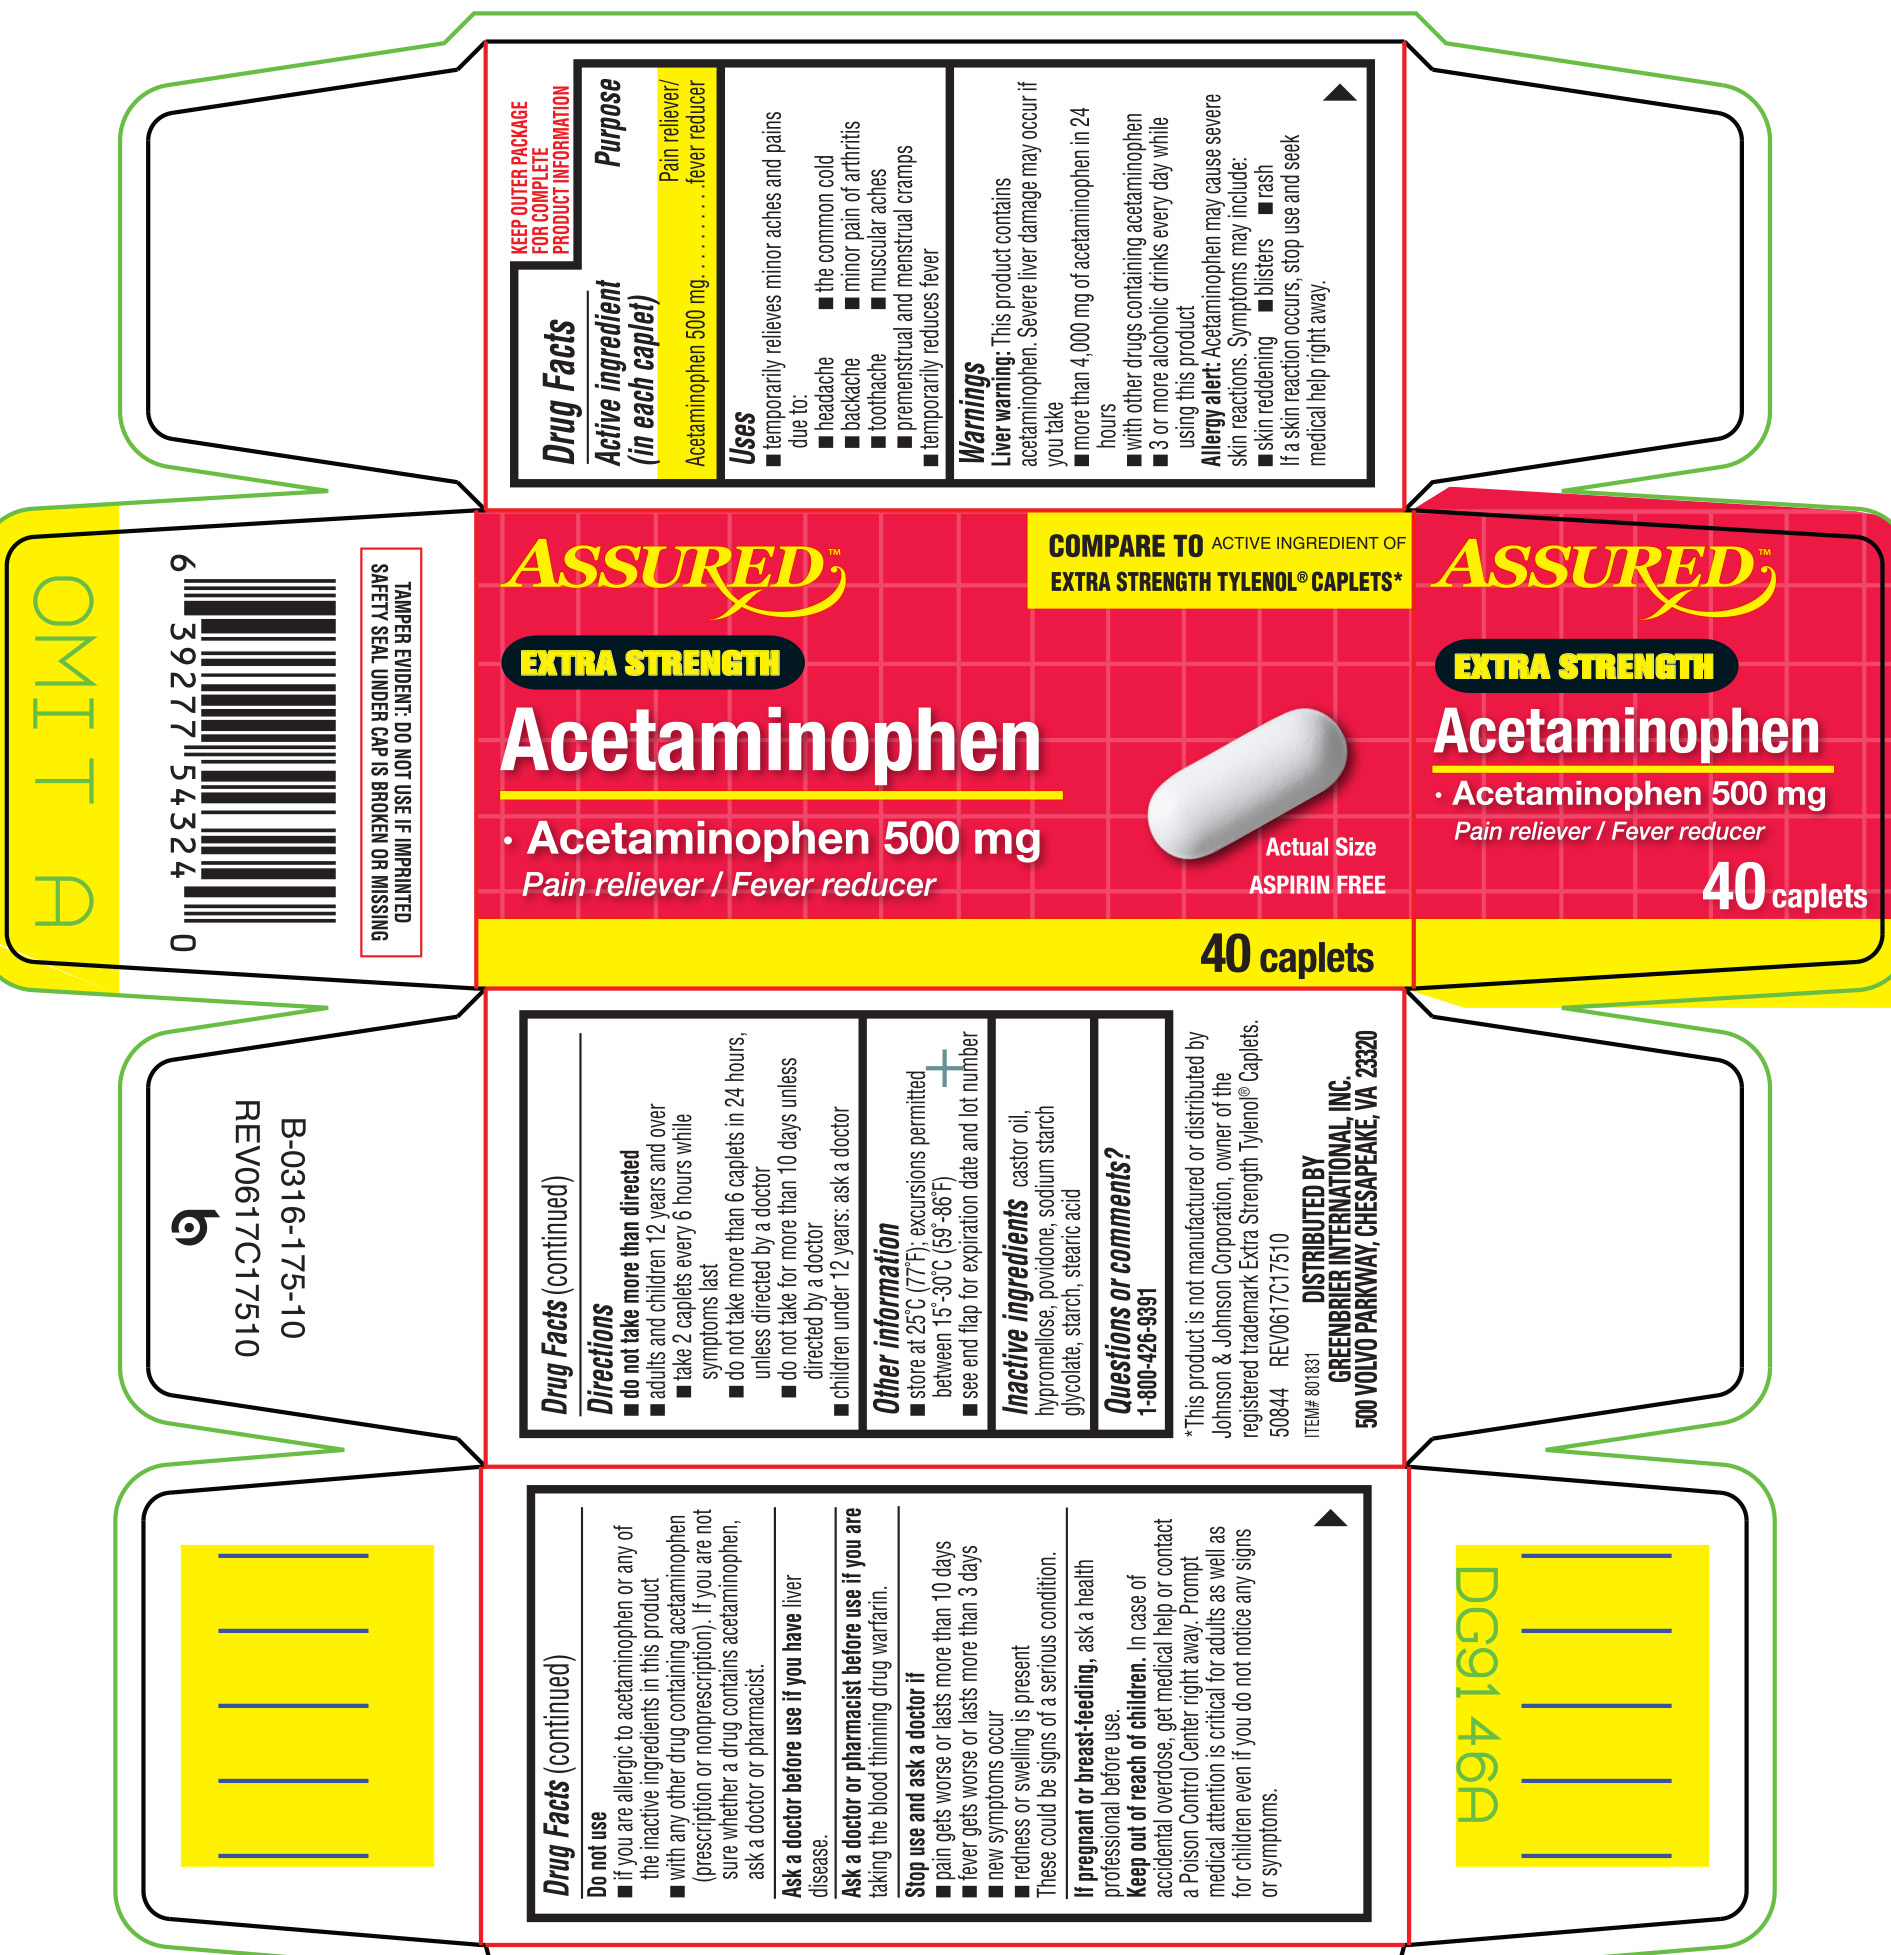 ndc-33992-0175-acetaminophen-extra-strength-tablet-film-coated-oral